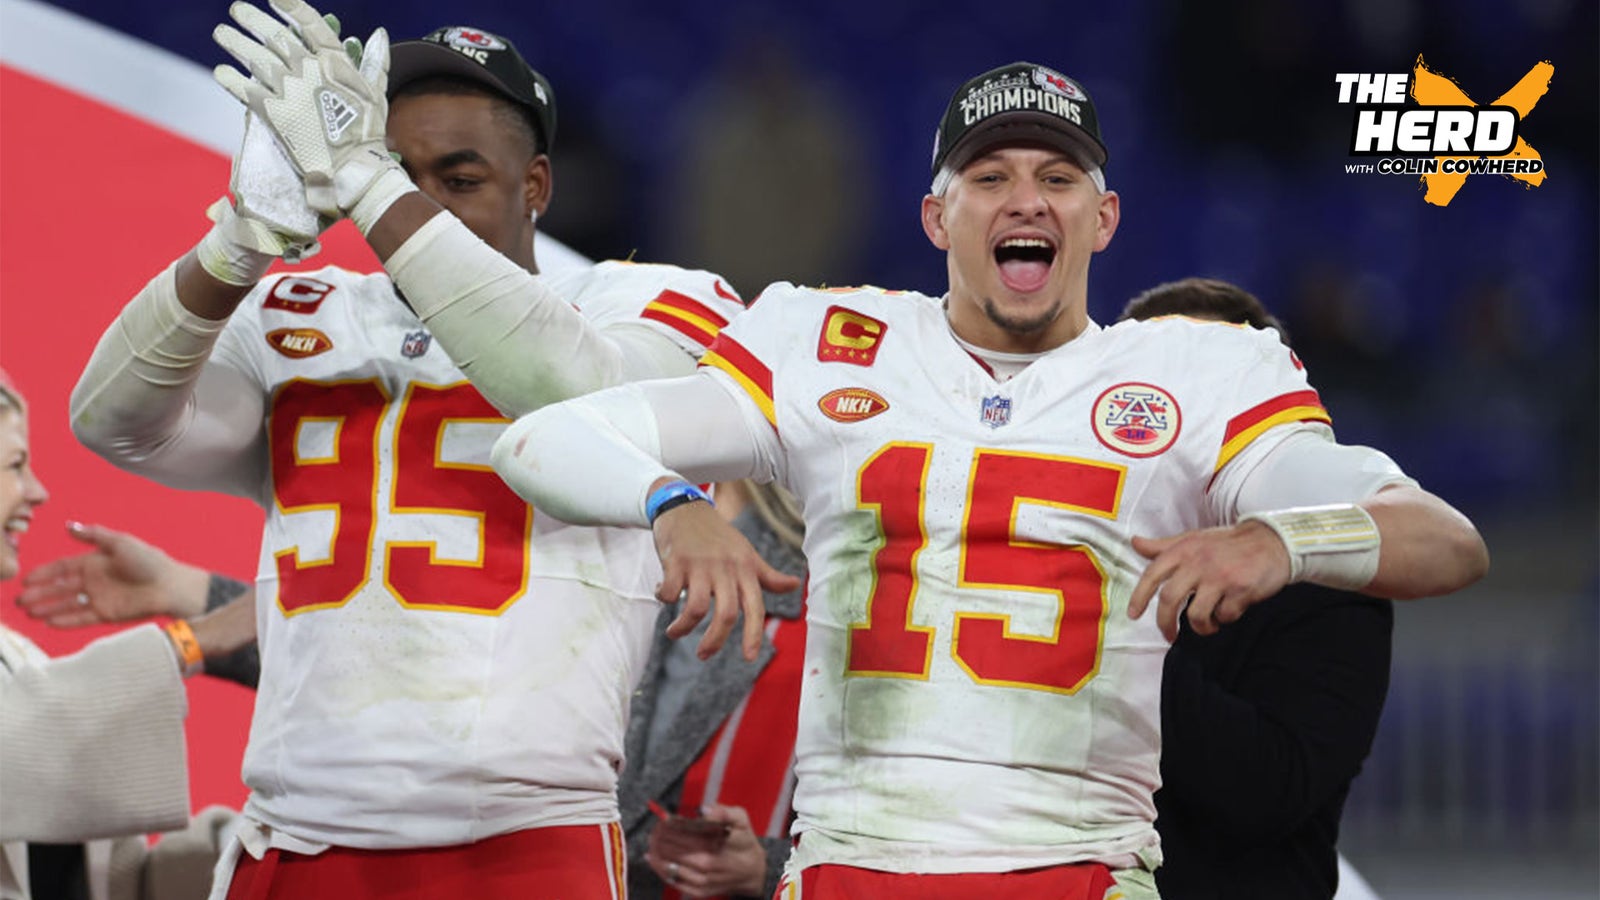 Colin Cowherd: Why Mahomes is "the greatest player that's ever played"